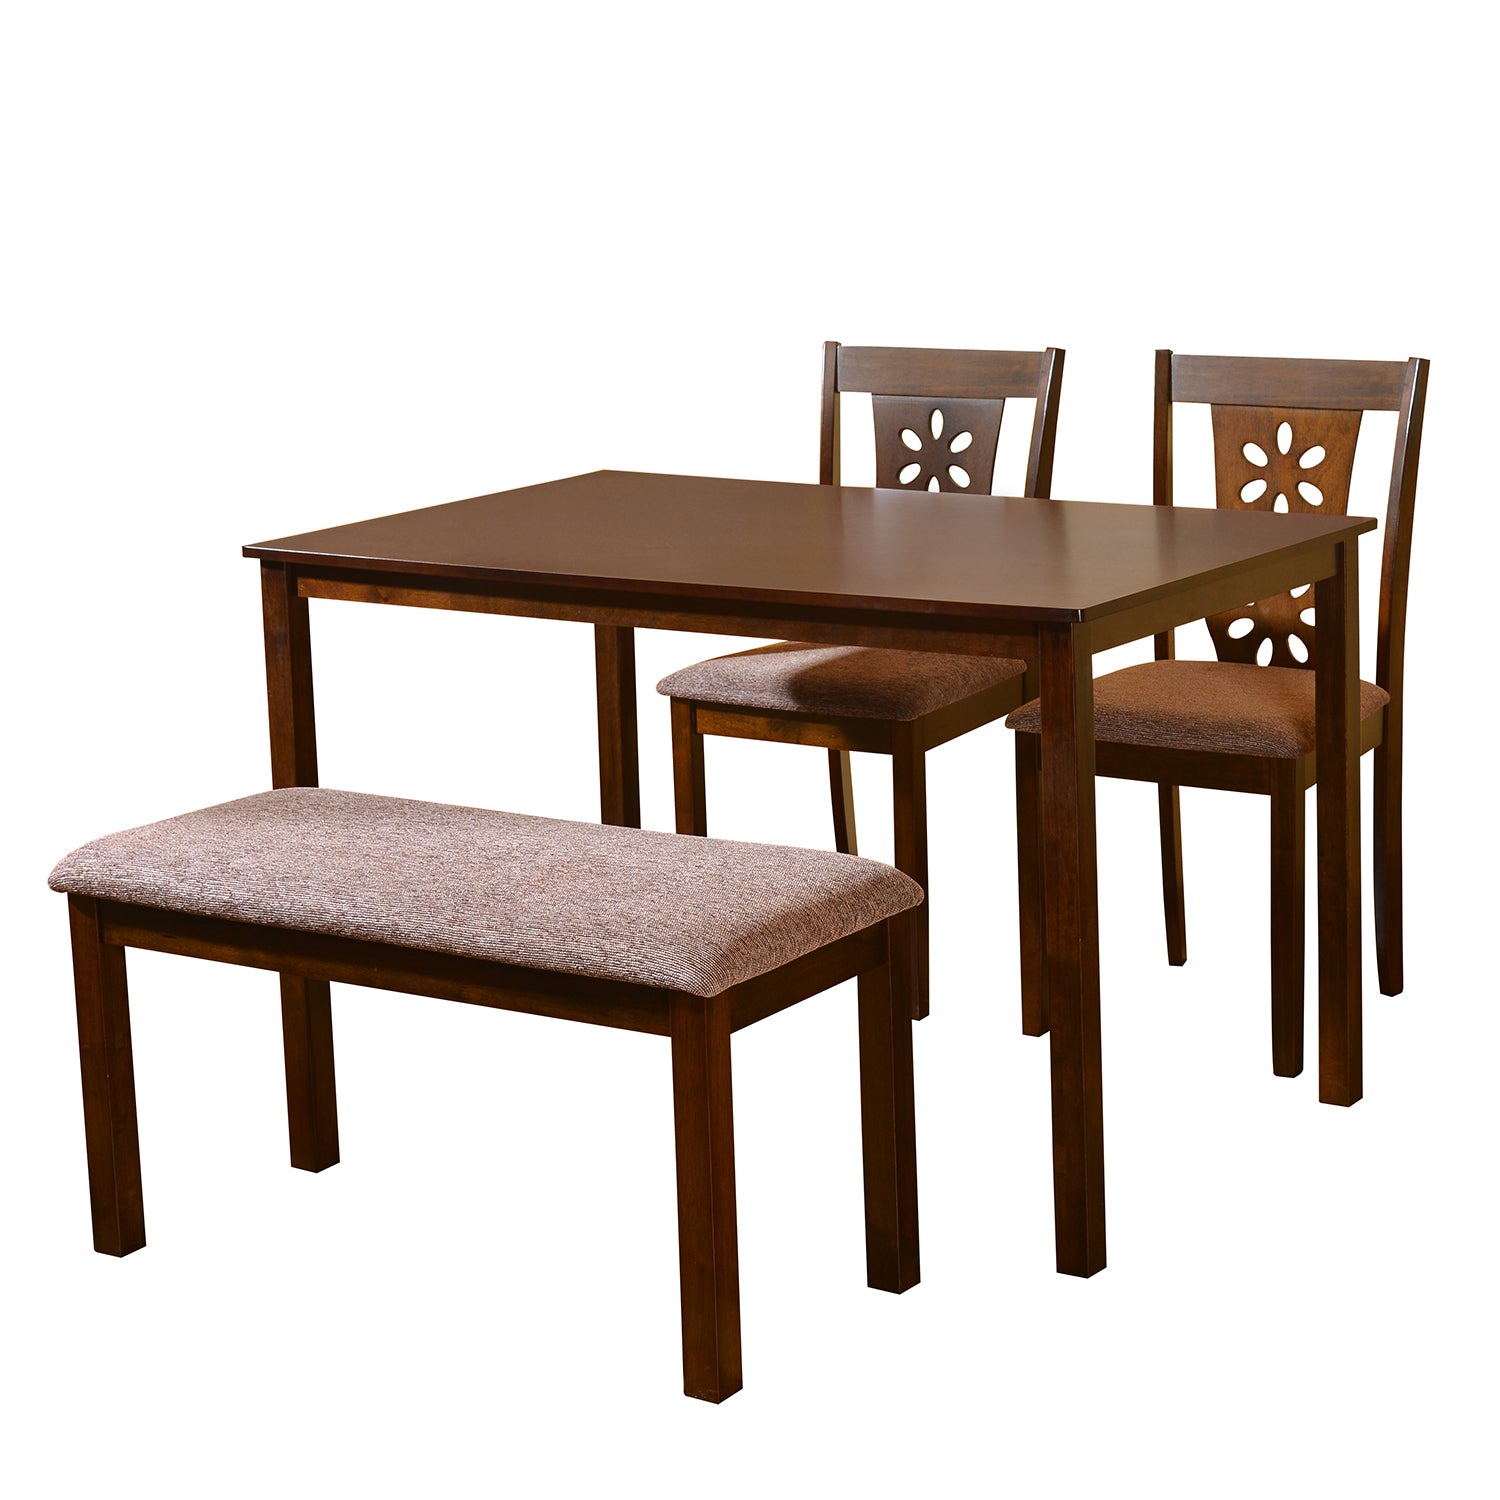 Sutlej 4 Seater Bench Dining Set (Antique Cherry)